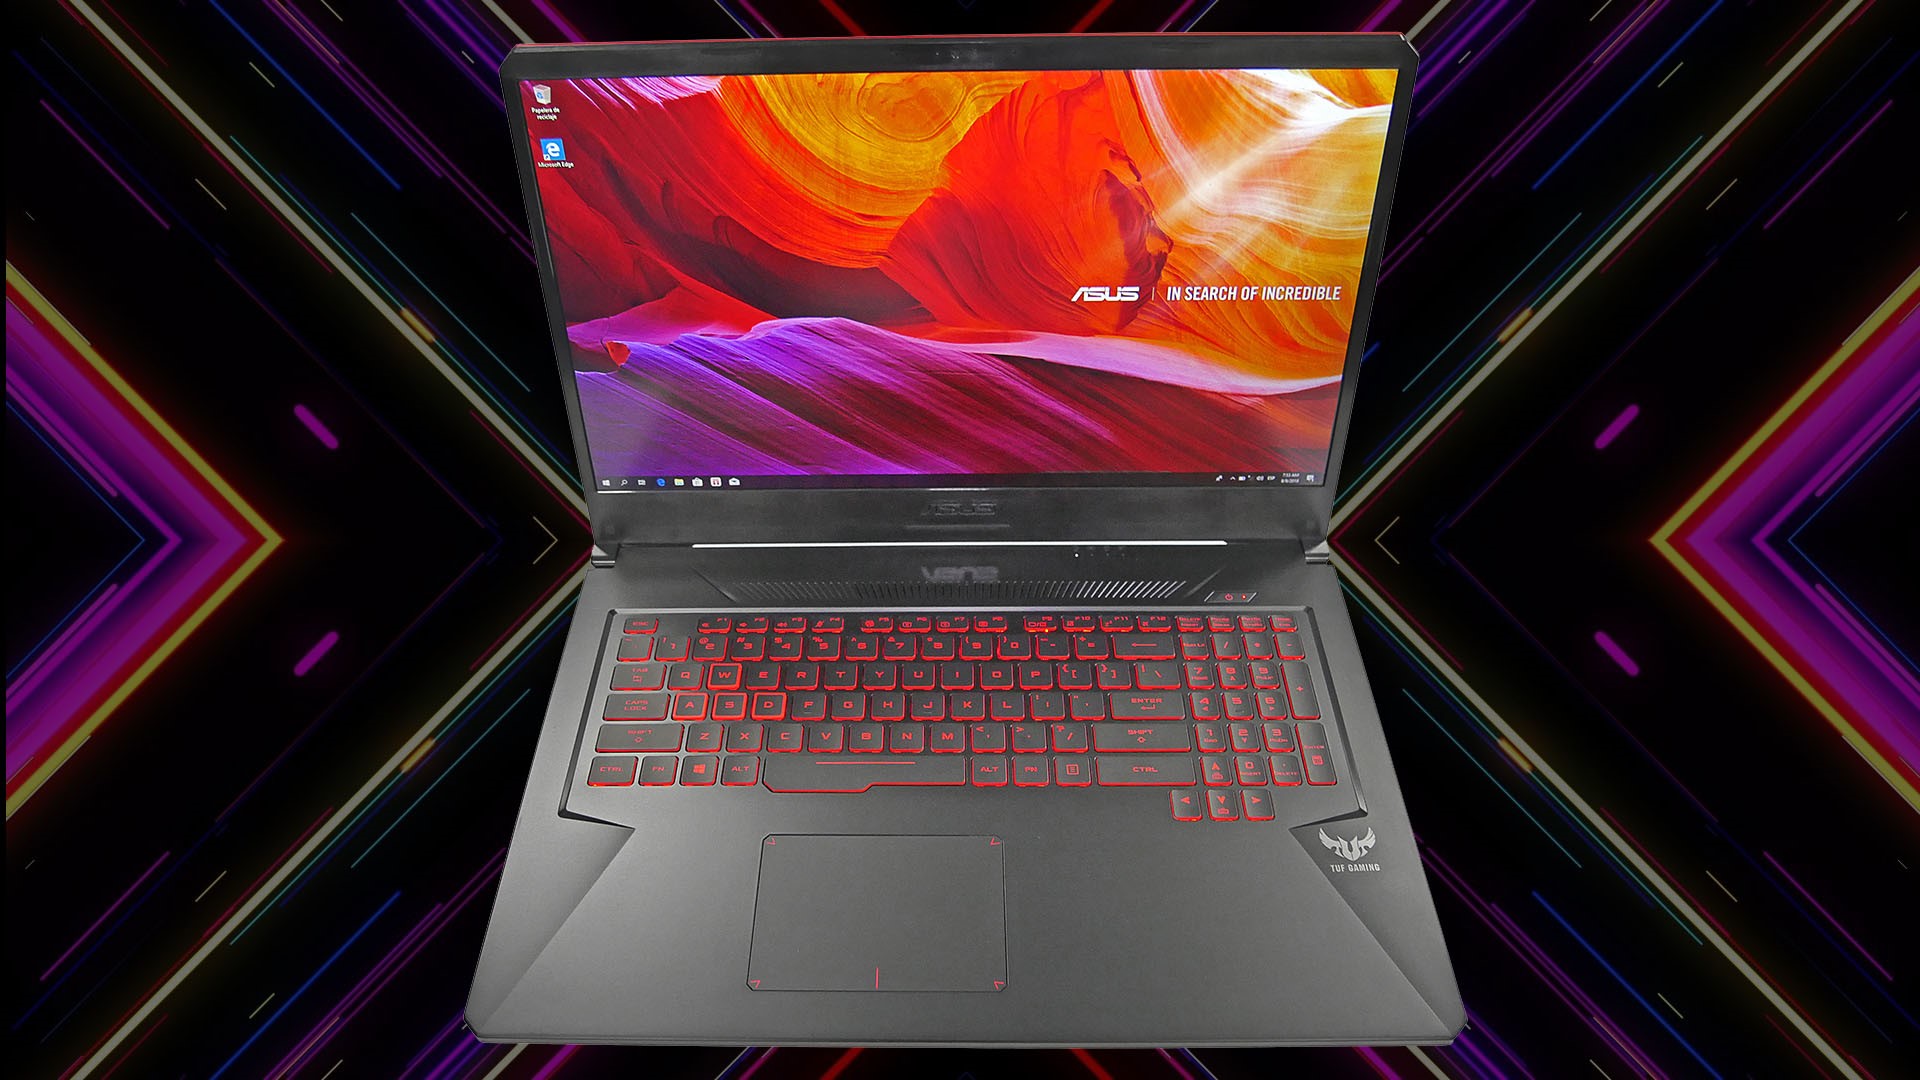 Asus fx705d. Ноутбук асус in search of incredible. Ноутбук ASUS in search of incredible x553m. ASUS TUF fx705d. Ноутбук ASUS SL 705d.